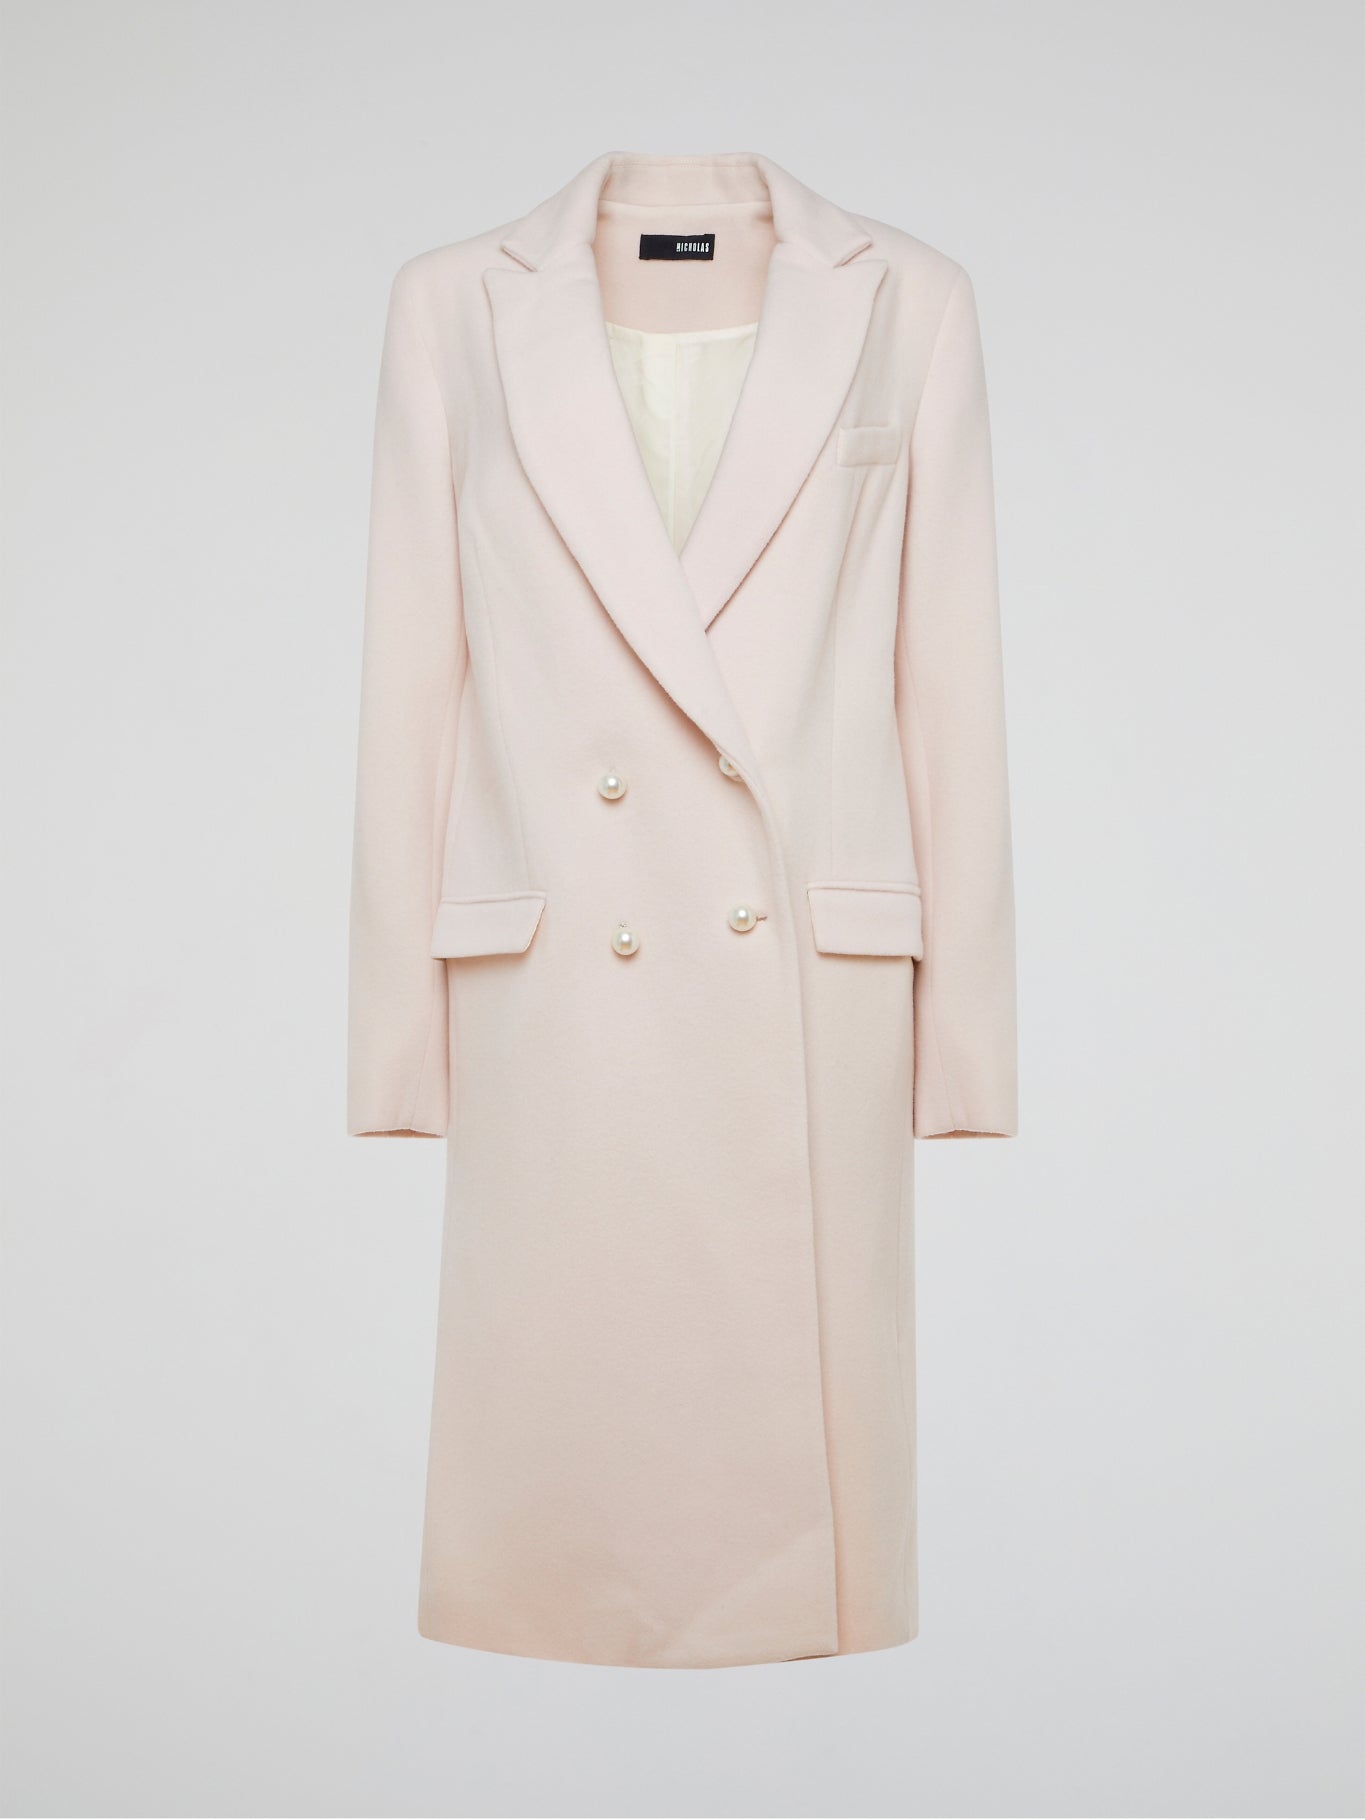 Step out in style with the Powder Pink Trench Coat Nicholas, a chic and sophisticated piece that will elevate any outfit. Its flattering fit and soft pastel hue make it the perfect statement piece for any fashion-forward individual. Be prepared for compliments wherever you go with this stunning wardrobe staple.